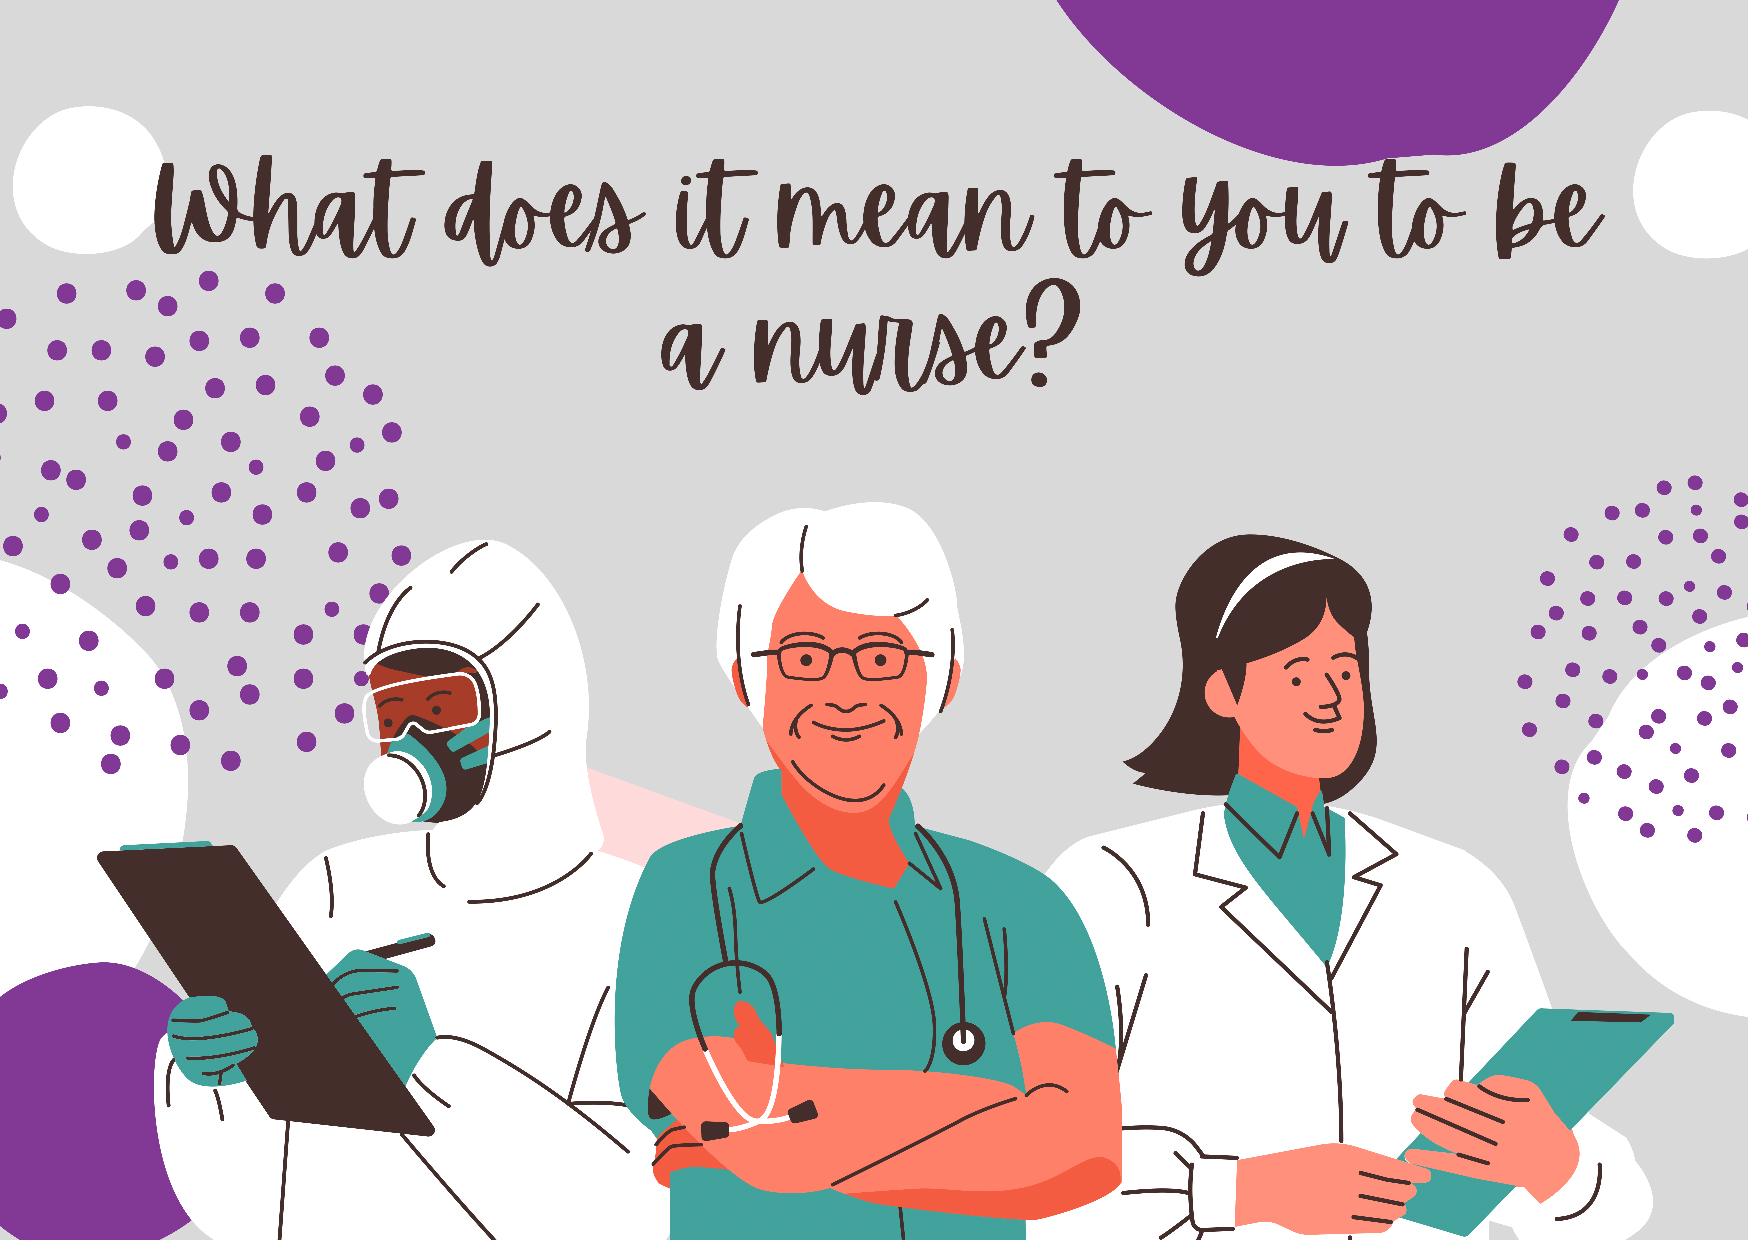 What does it mean to you to be a nurse?